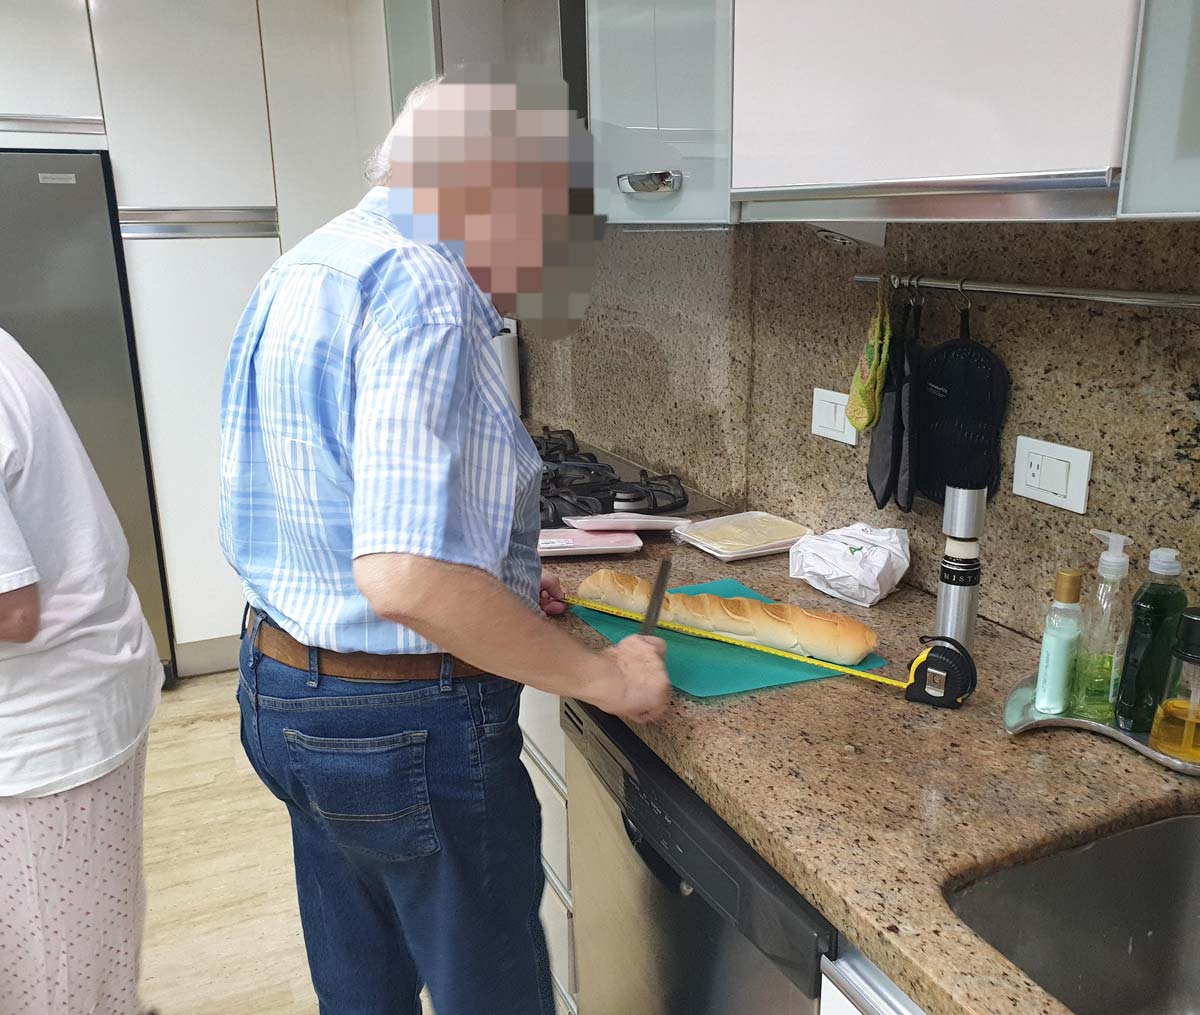 My dad, a compulsive precisionist, uses measuring tape to divide a baguette in exact thirds